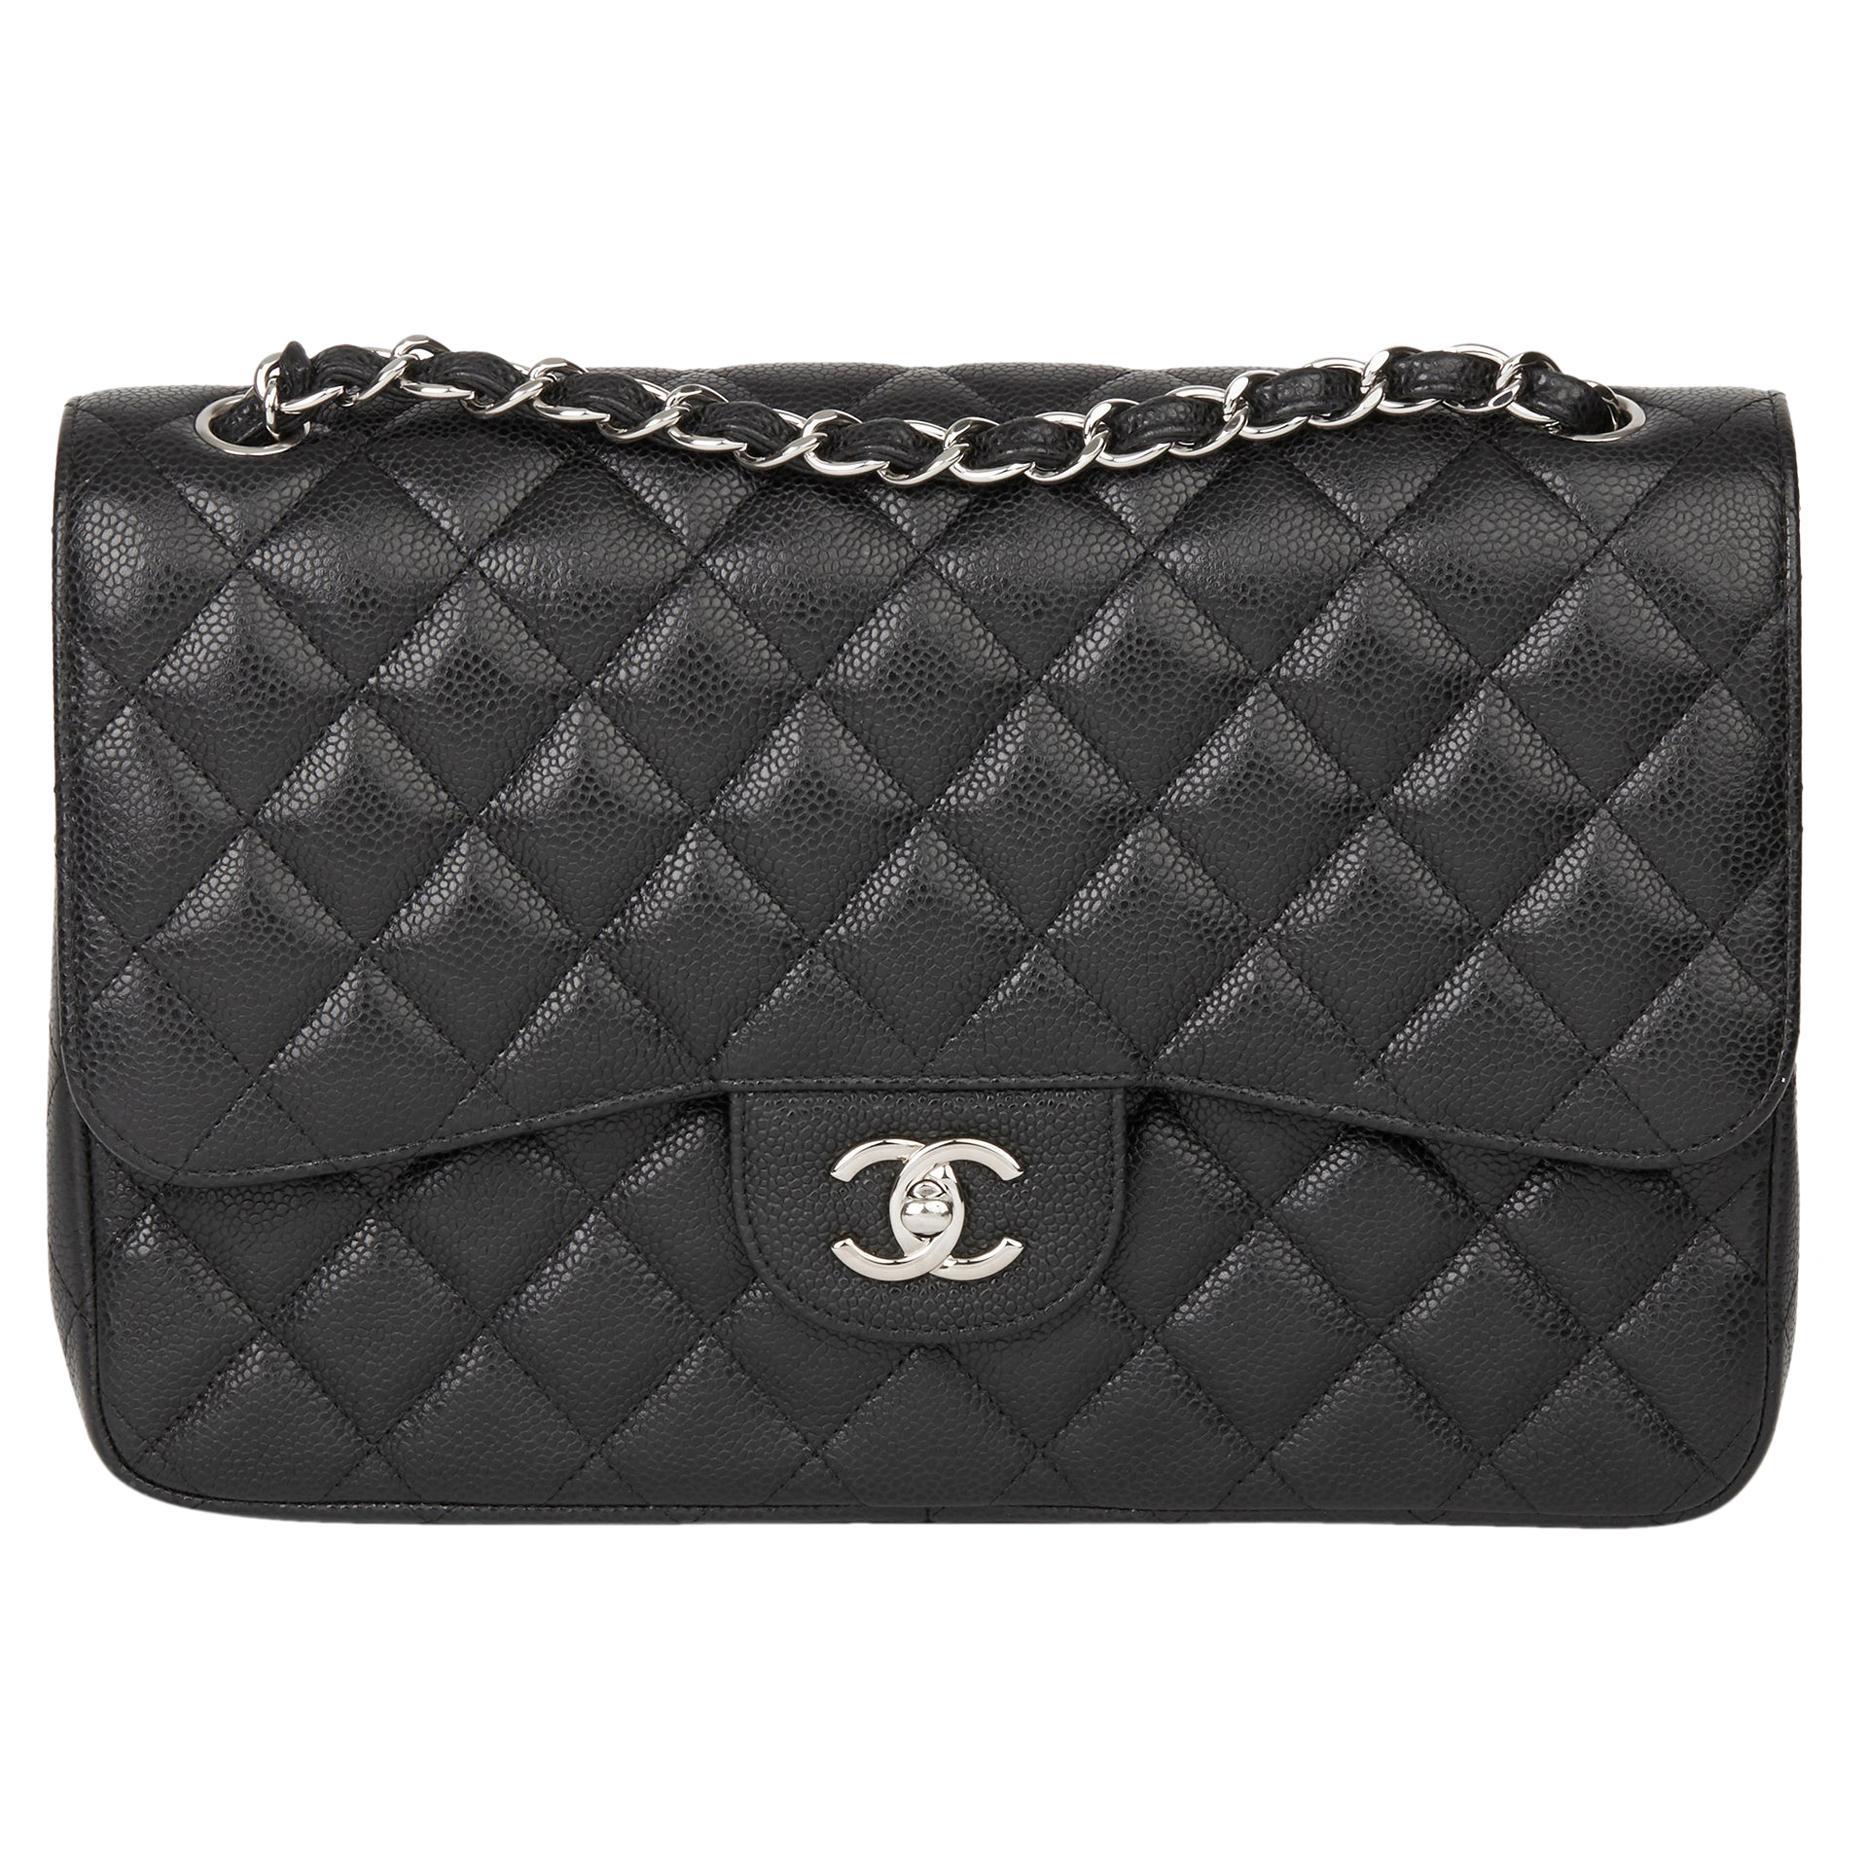 Chanel 2014 Black Quilted Caviar Leather Jumbo Classic Double Flap Bag